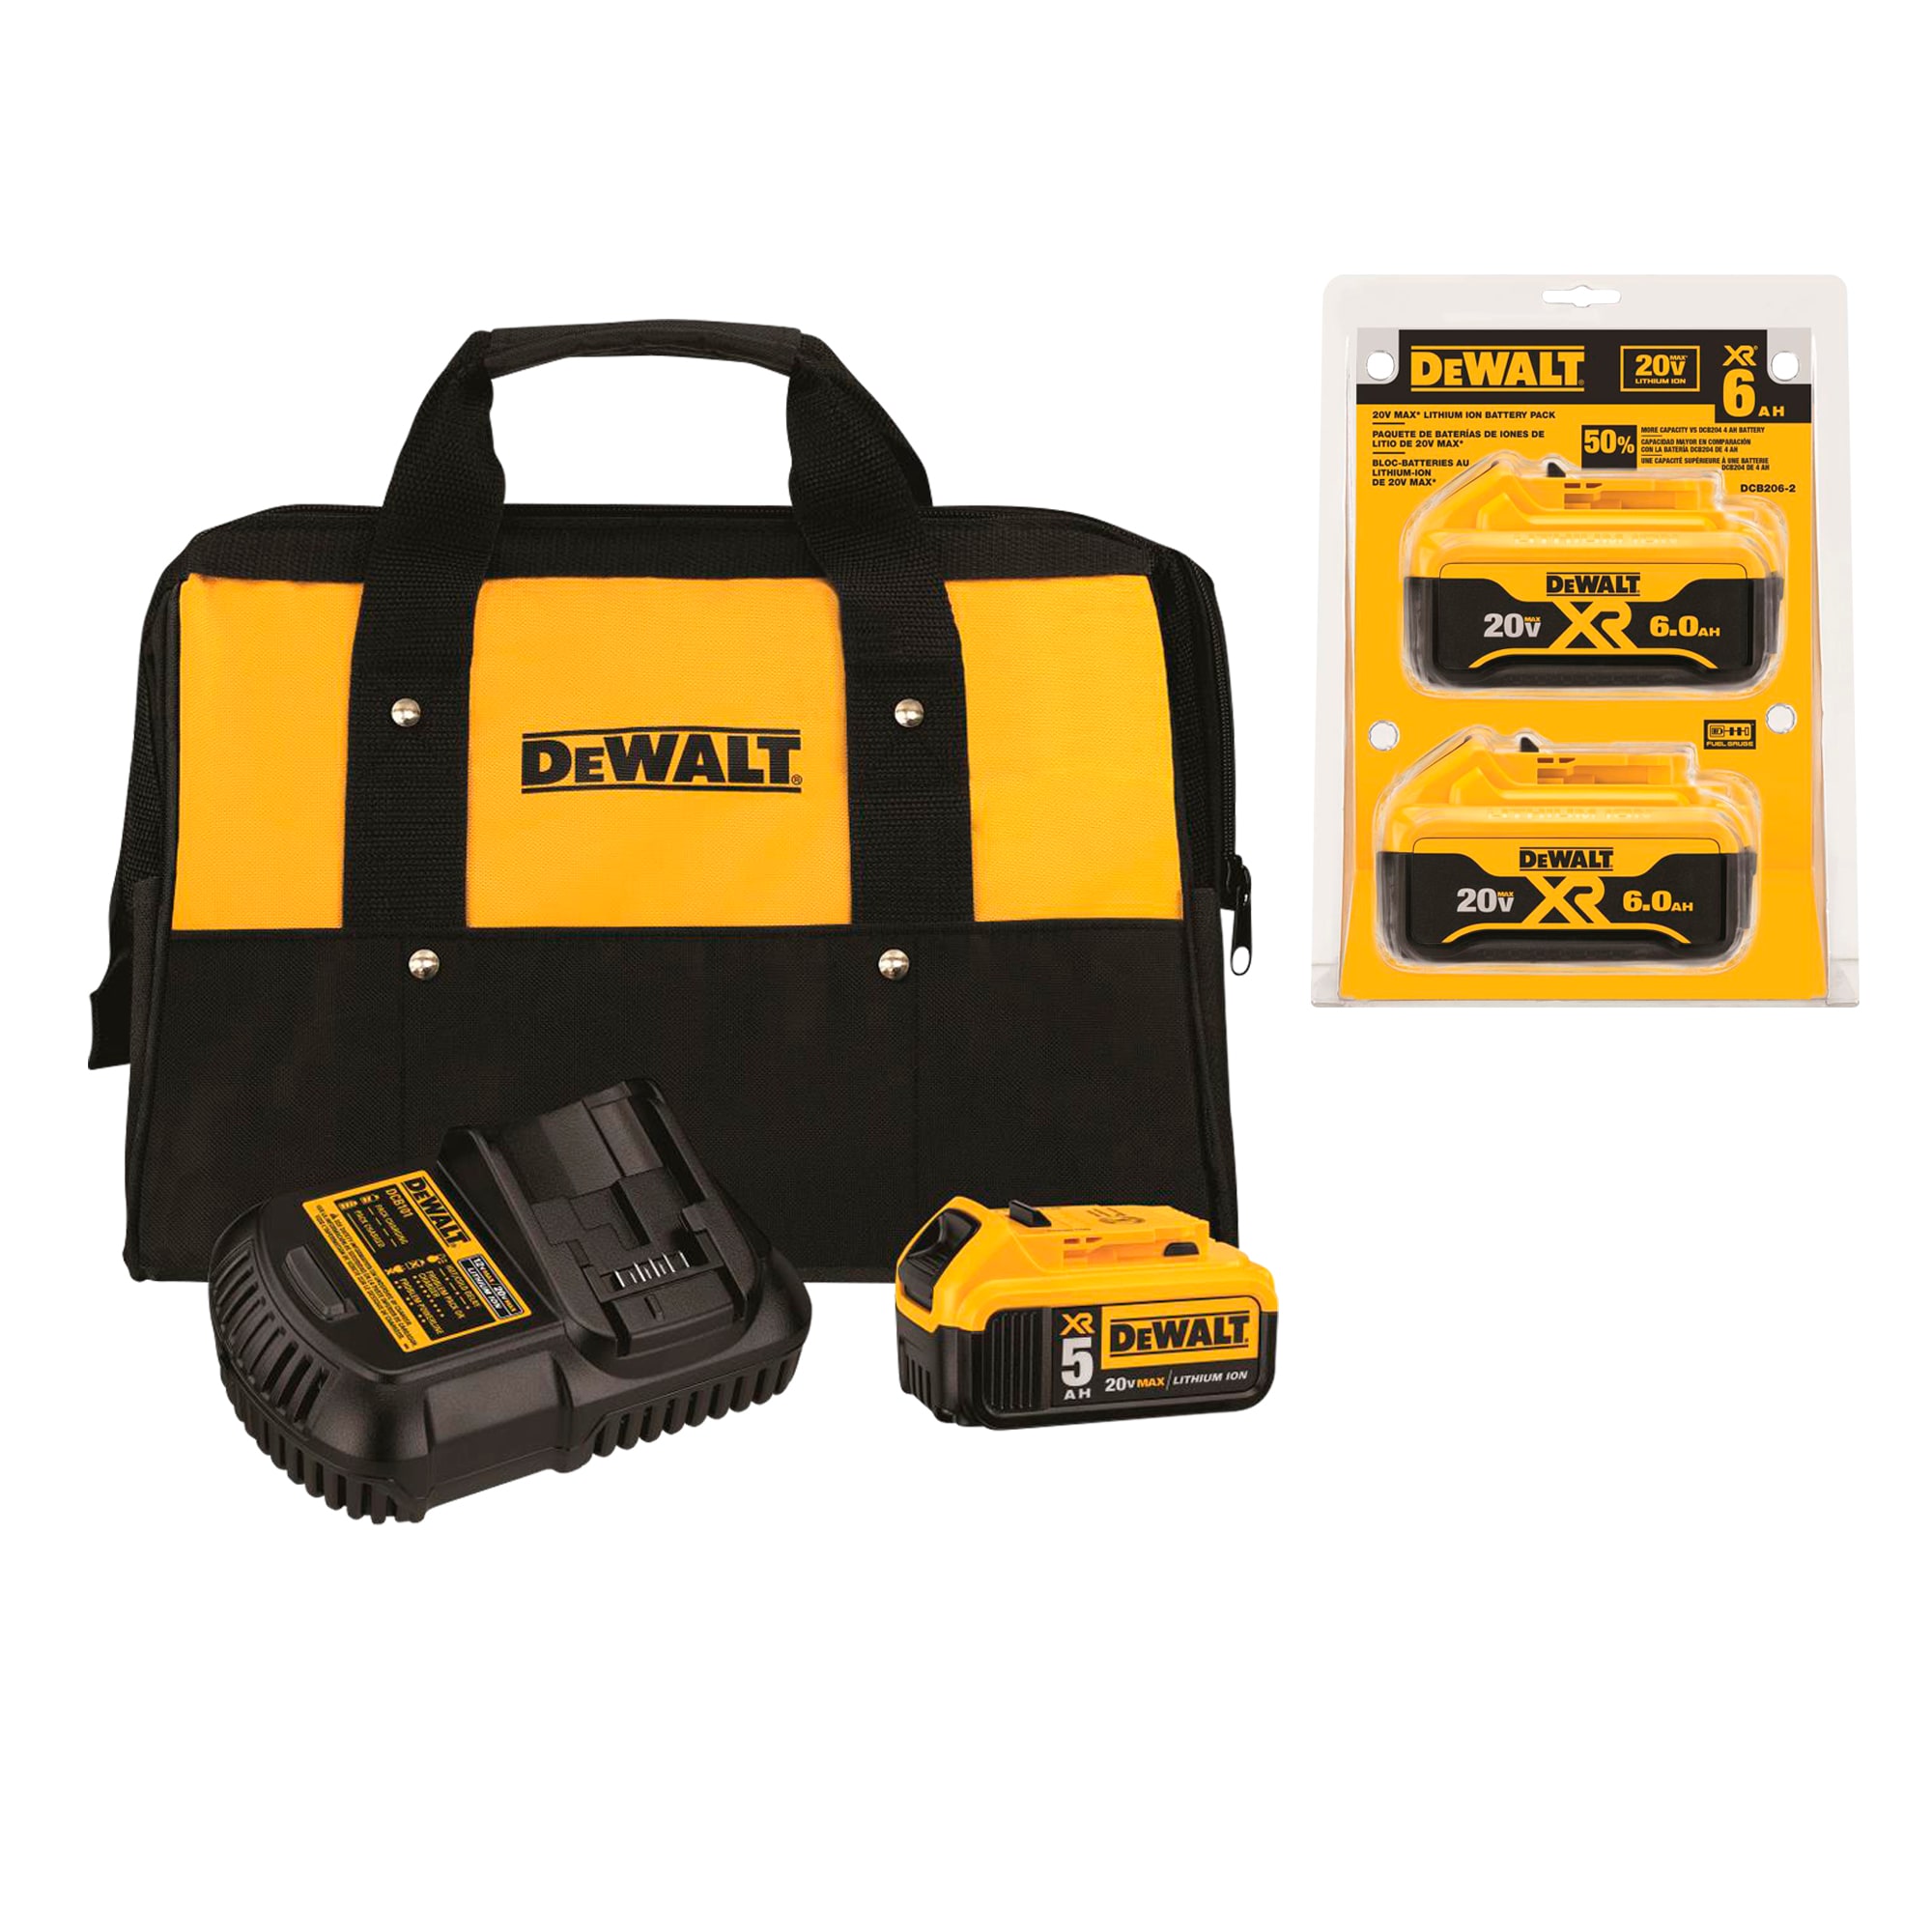 DEWALT 20-Volt 2-Pack; 6 Amp-Hour Lithium Power Tool Battery Kit & XR 20-Volt Max 5 Amp-Hour Lithium Power Tool Battery Kit (Charger Included)